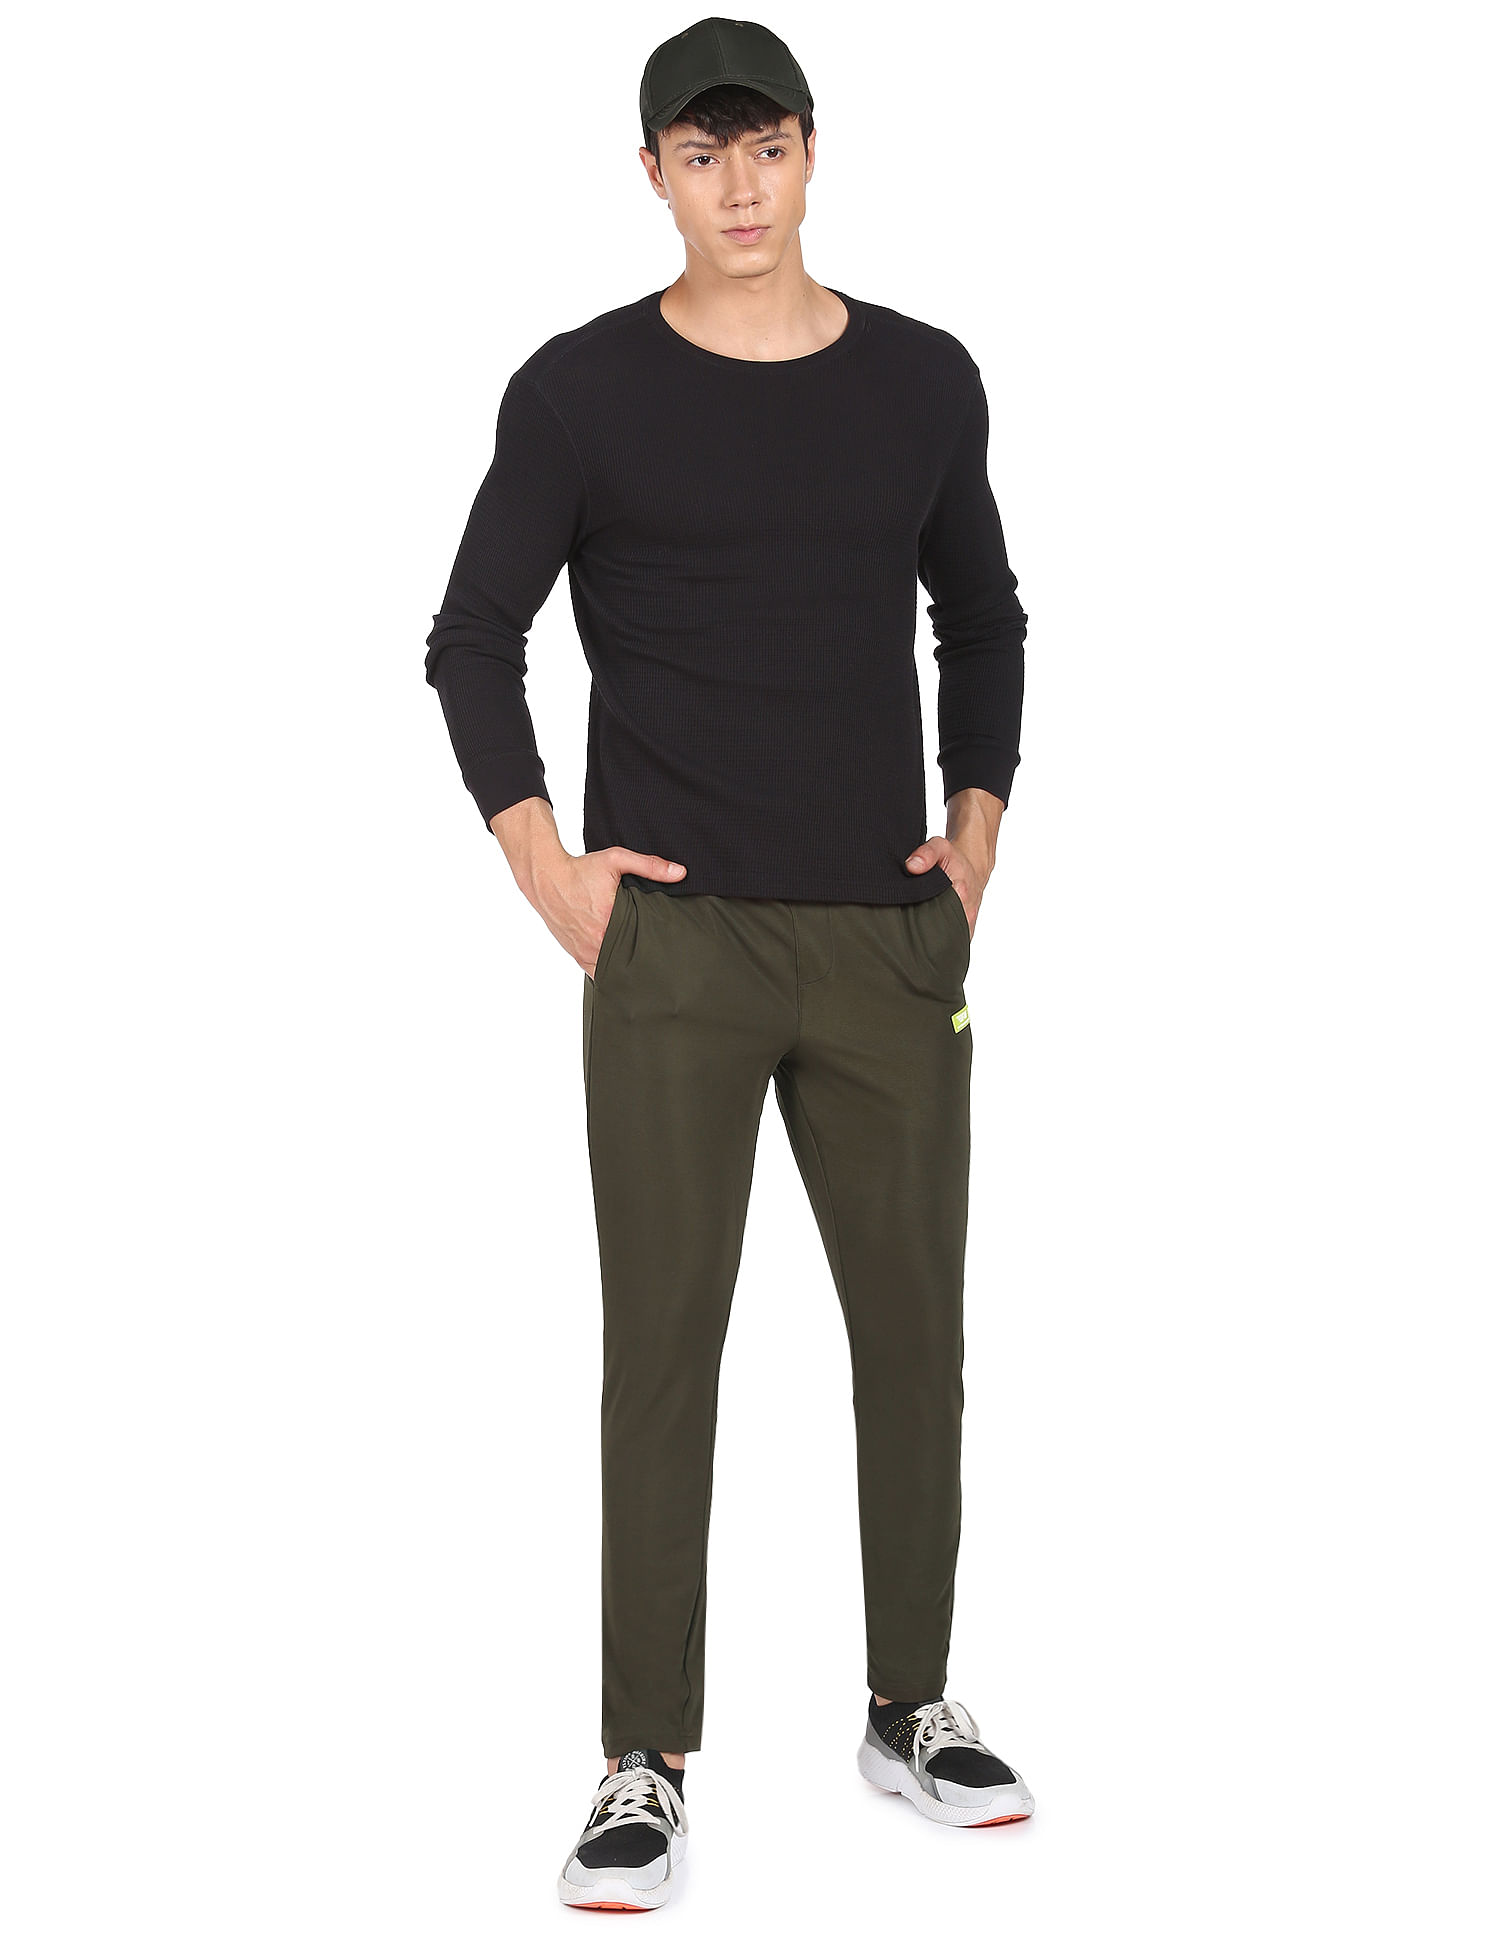 Polyester Spandex Pants | Old Navy